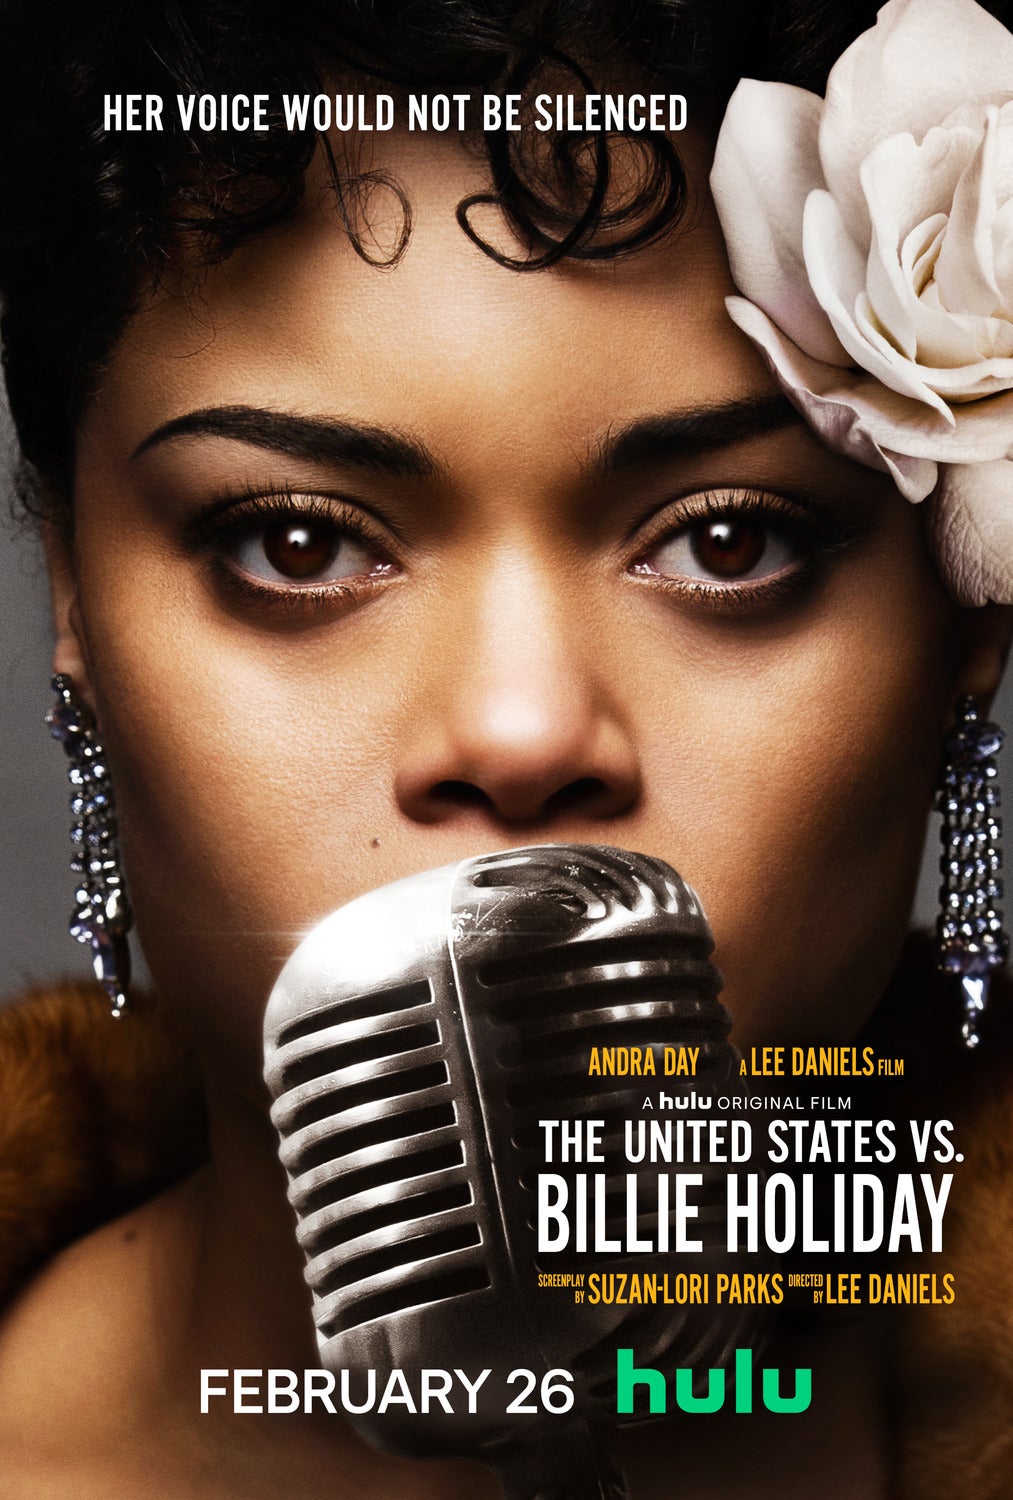 Movie poster for "The United States vs. Billie Holiday".